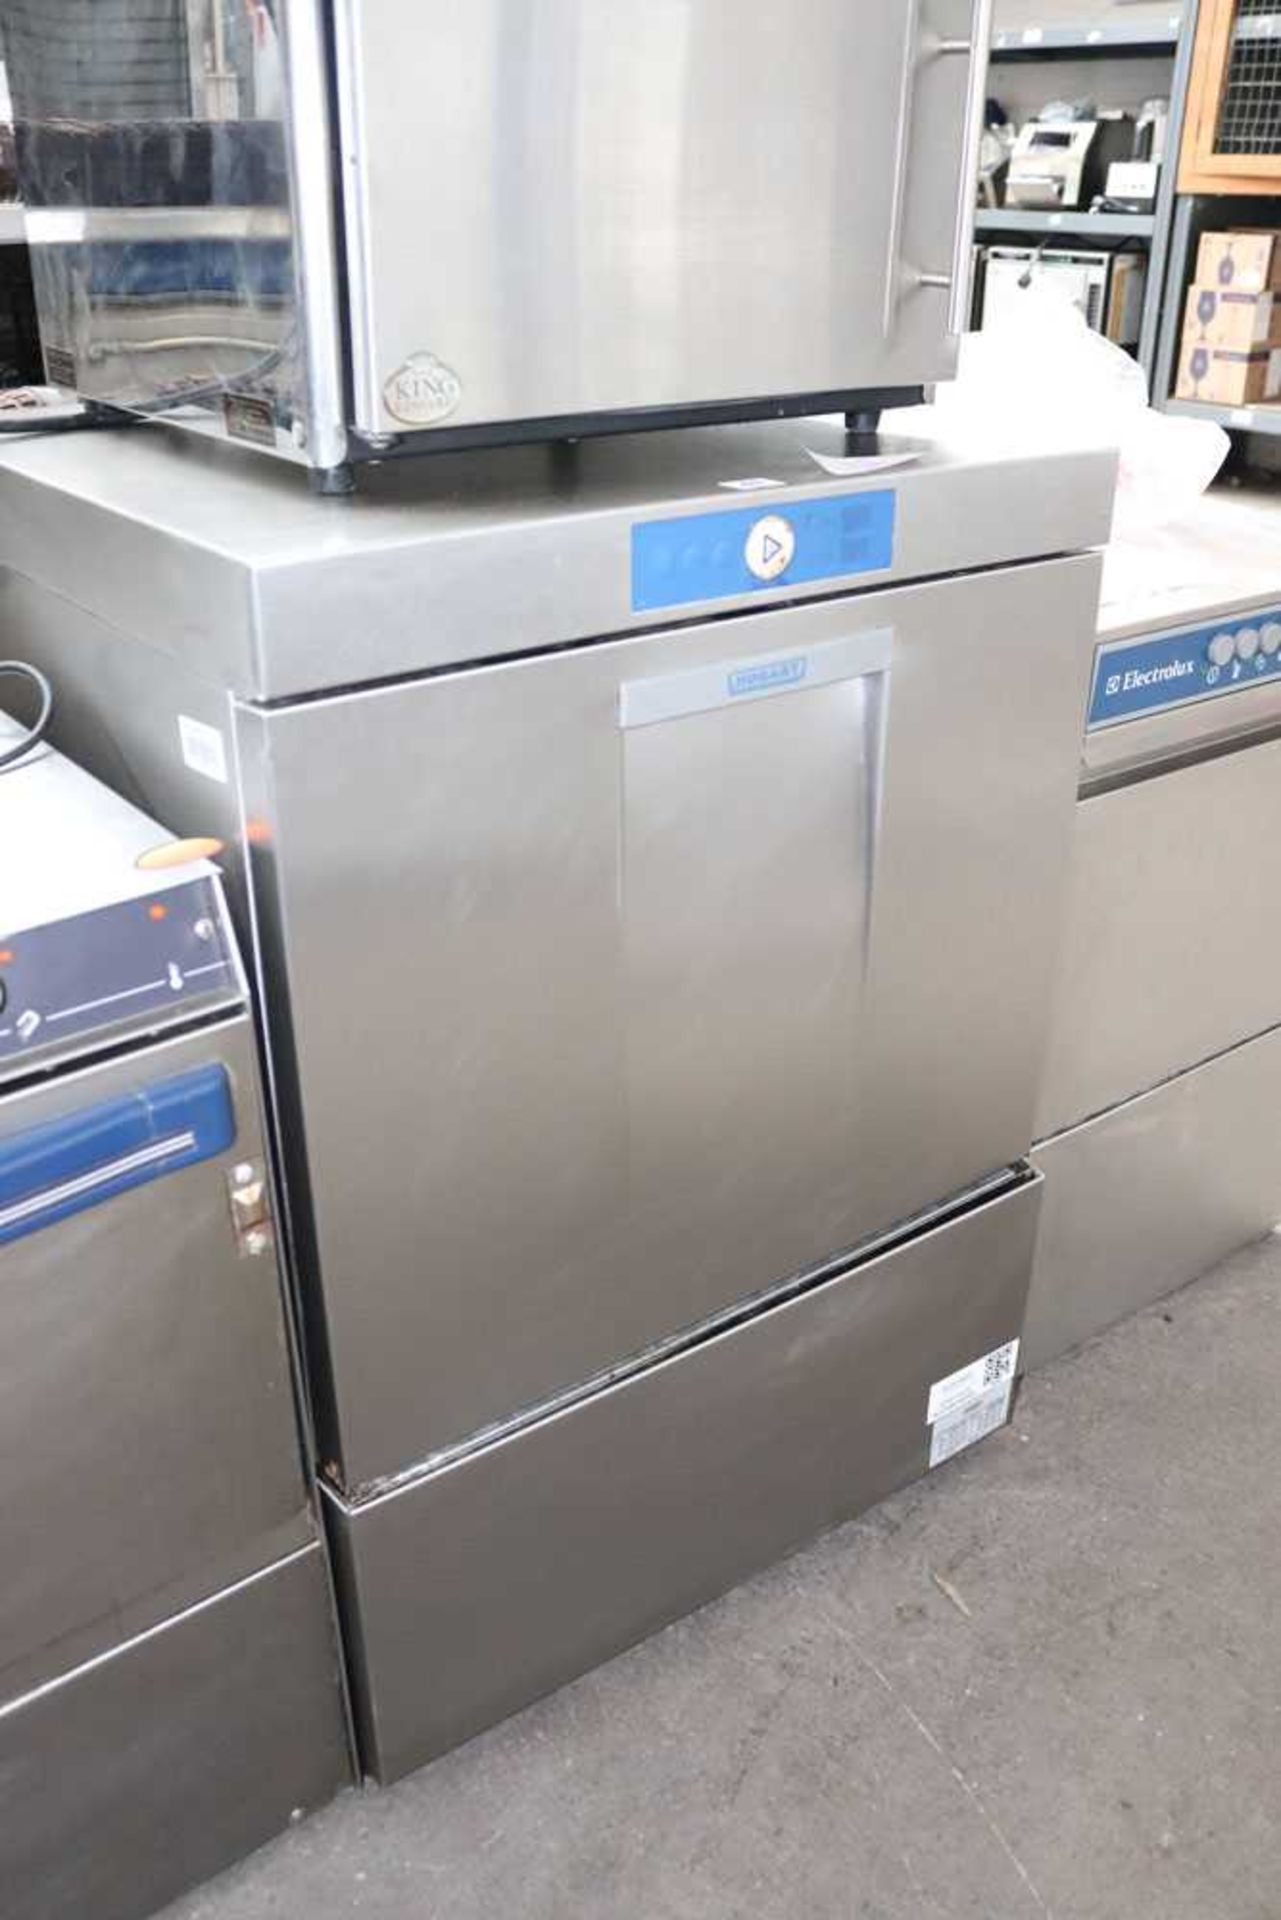 50cm Hobart model FX400-70M under counter dishwasher with built in water softener and 2 trays